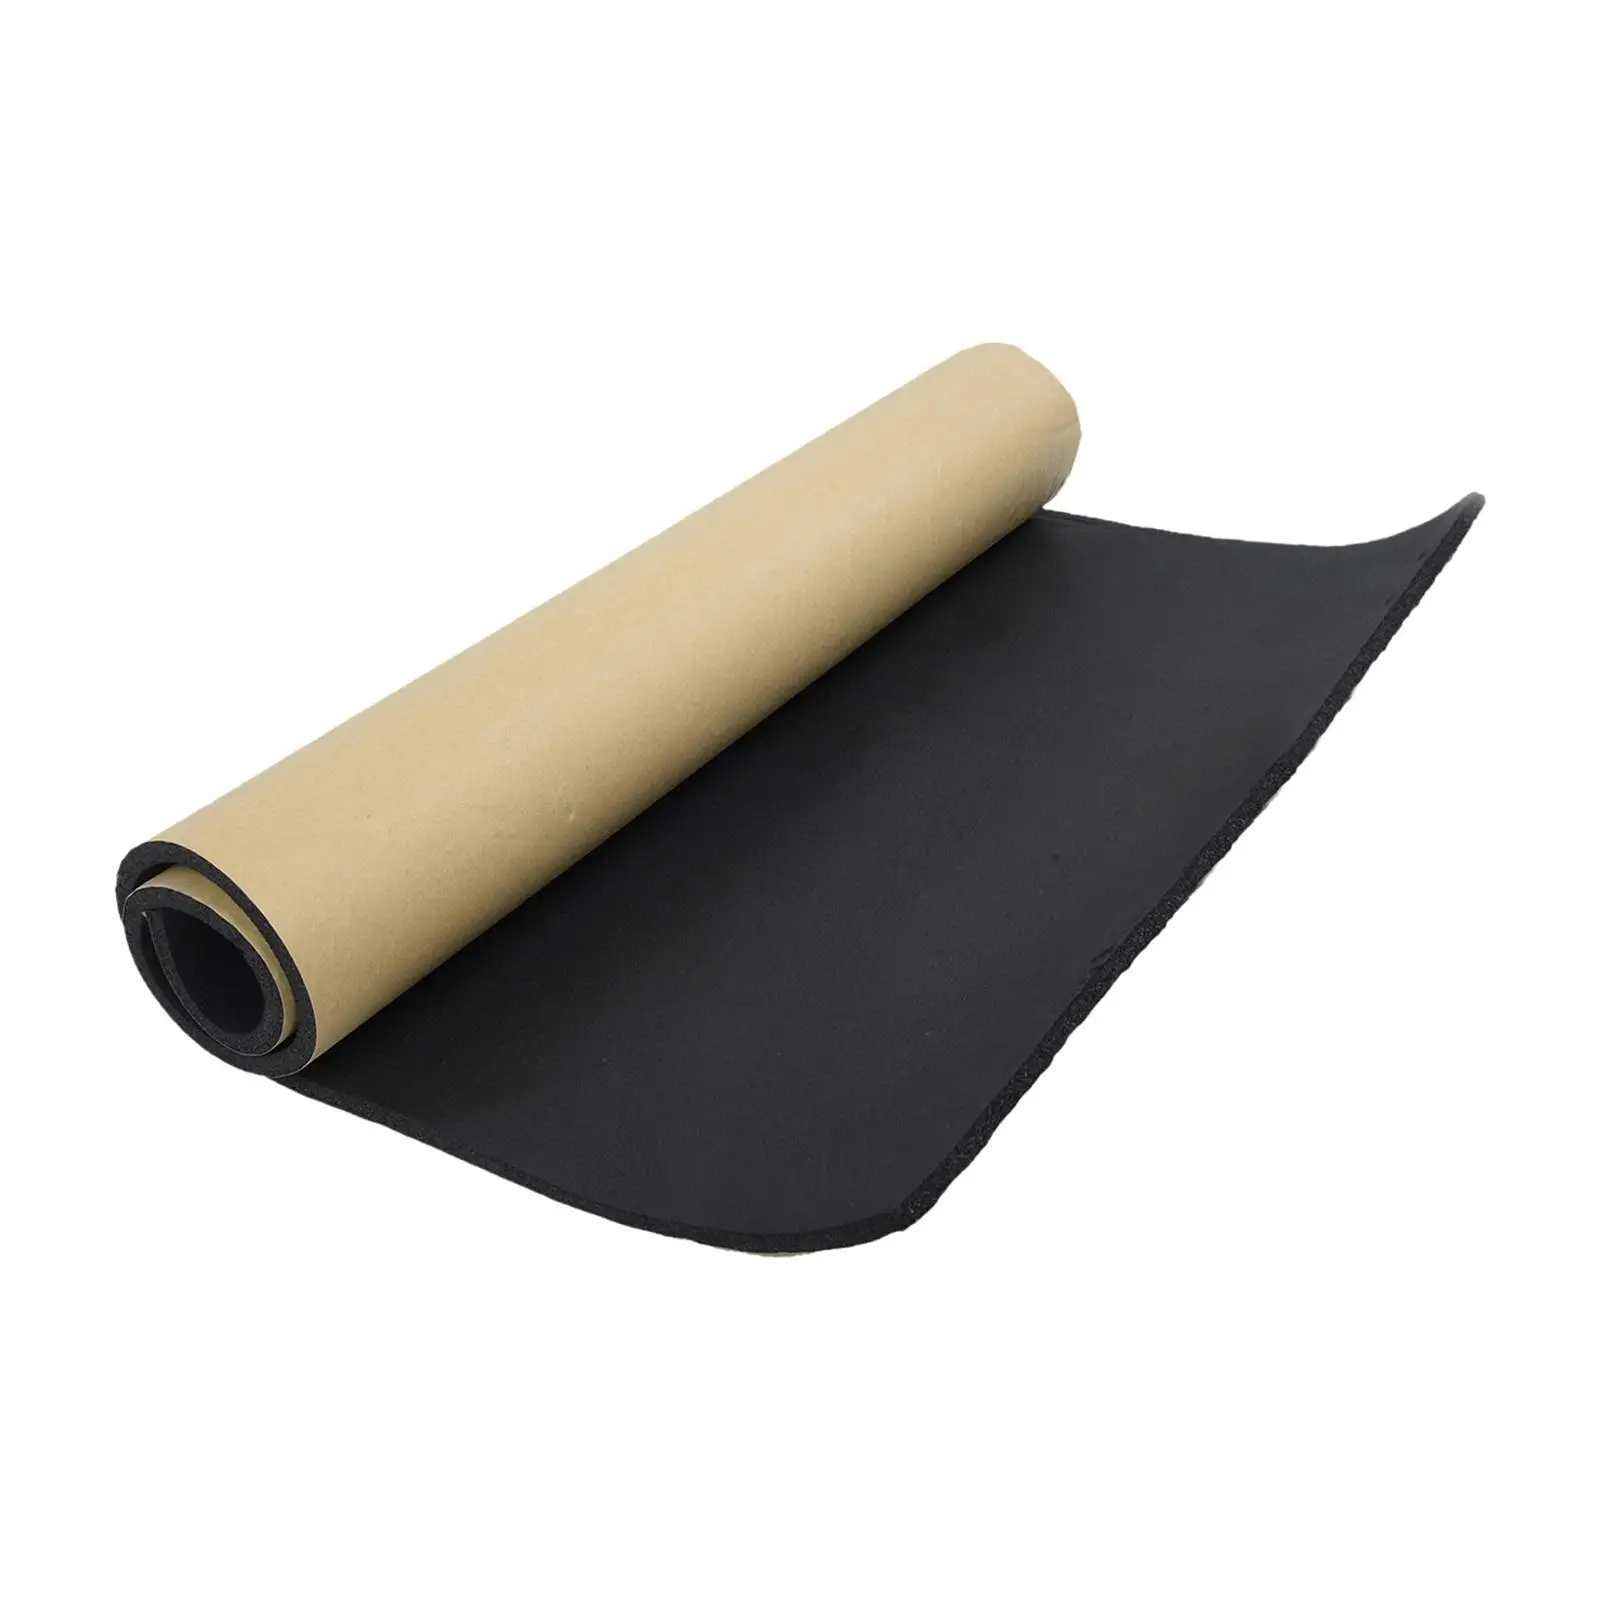 Car Insulation Mat Waterproof Engine Insulation Foam Laminate Easily Install for Engine Hood Roof Soundproof